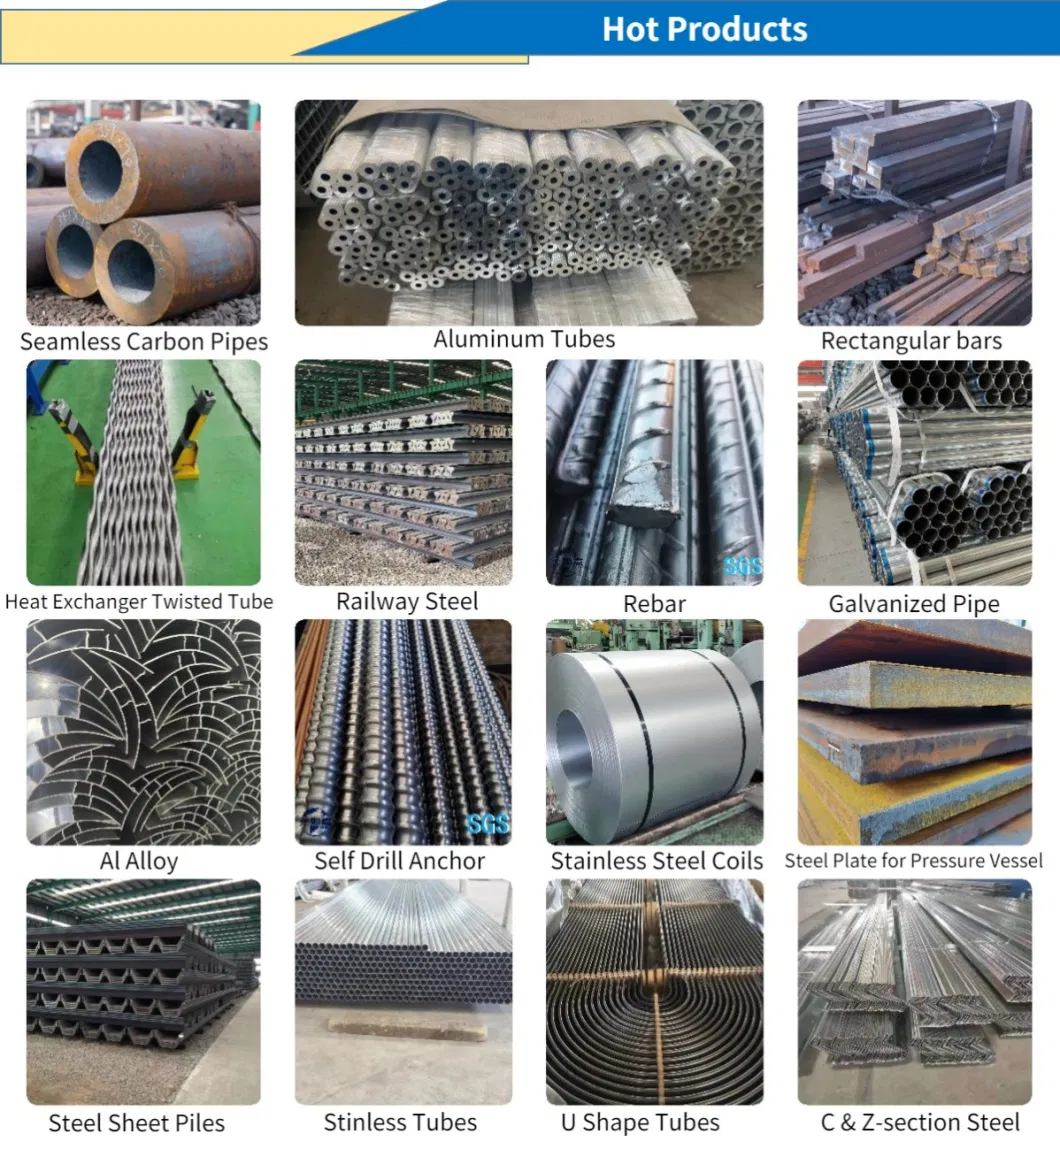 Cold Drawn Rolled SAE 1020 Bright Mild Ms Carbon Solid for Machinery Alloy Forged Steel Round Flat Tool Rod Rebar Structural Bar